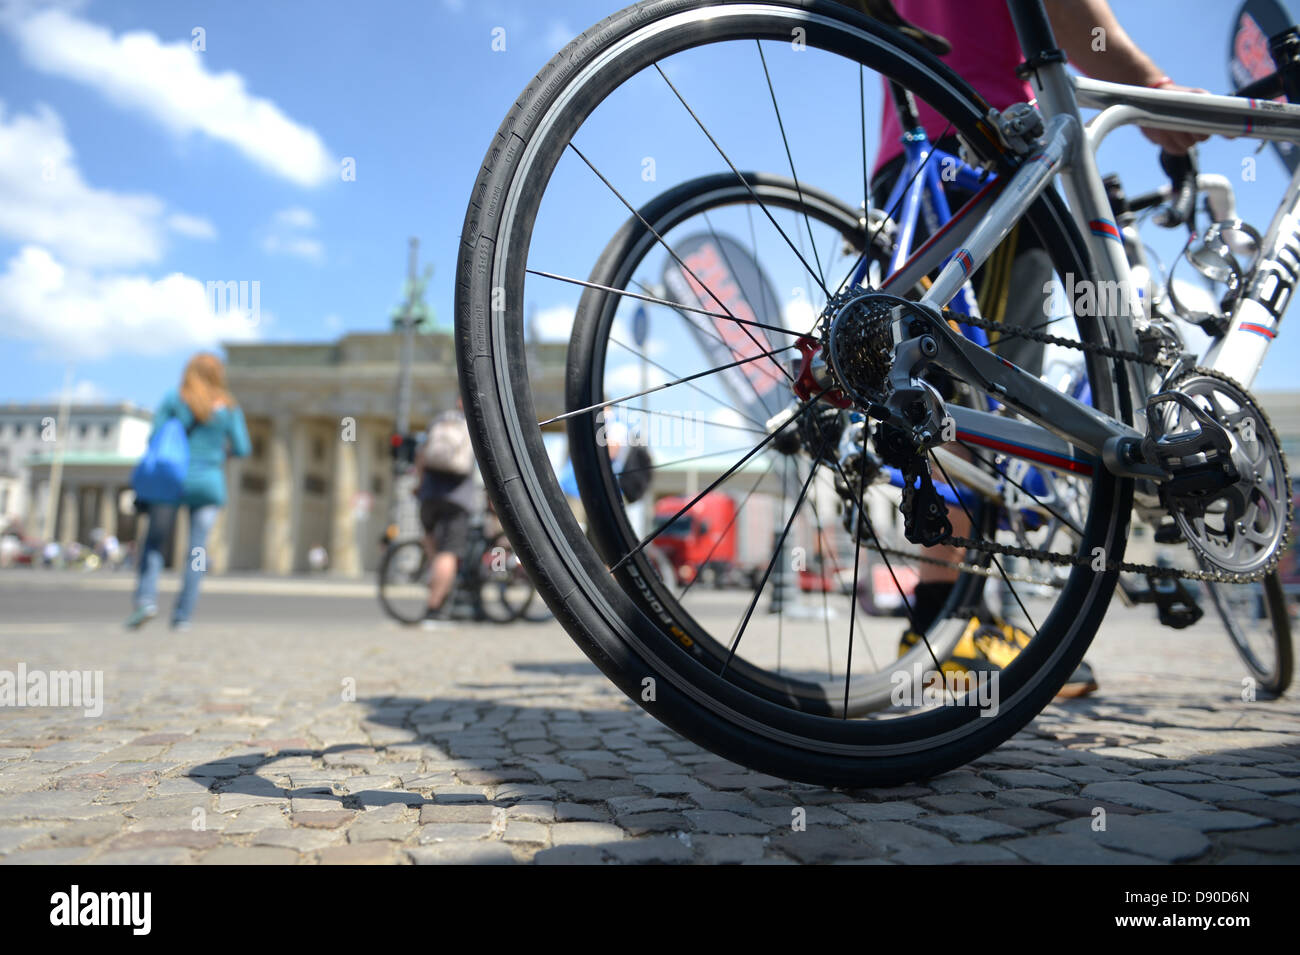 Velothon Berlin High Resolution Stock Photography and Images - Alamy